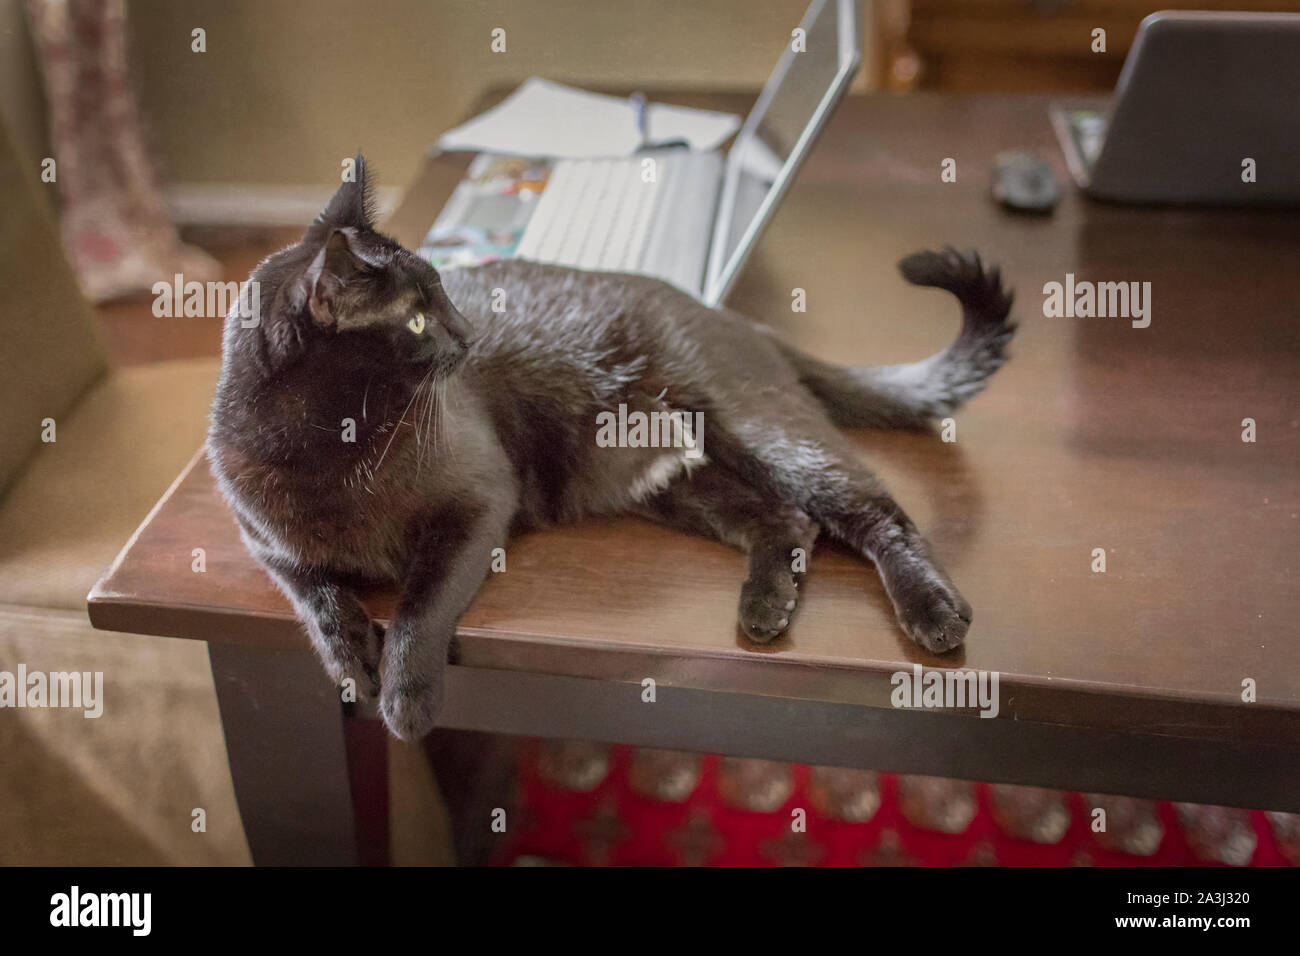 Naughty black cat lounges on dining room table with family laptops Stock Photo